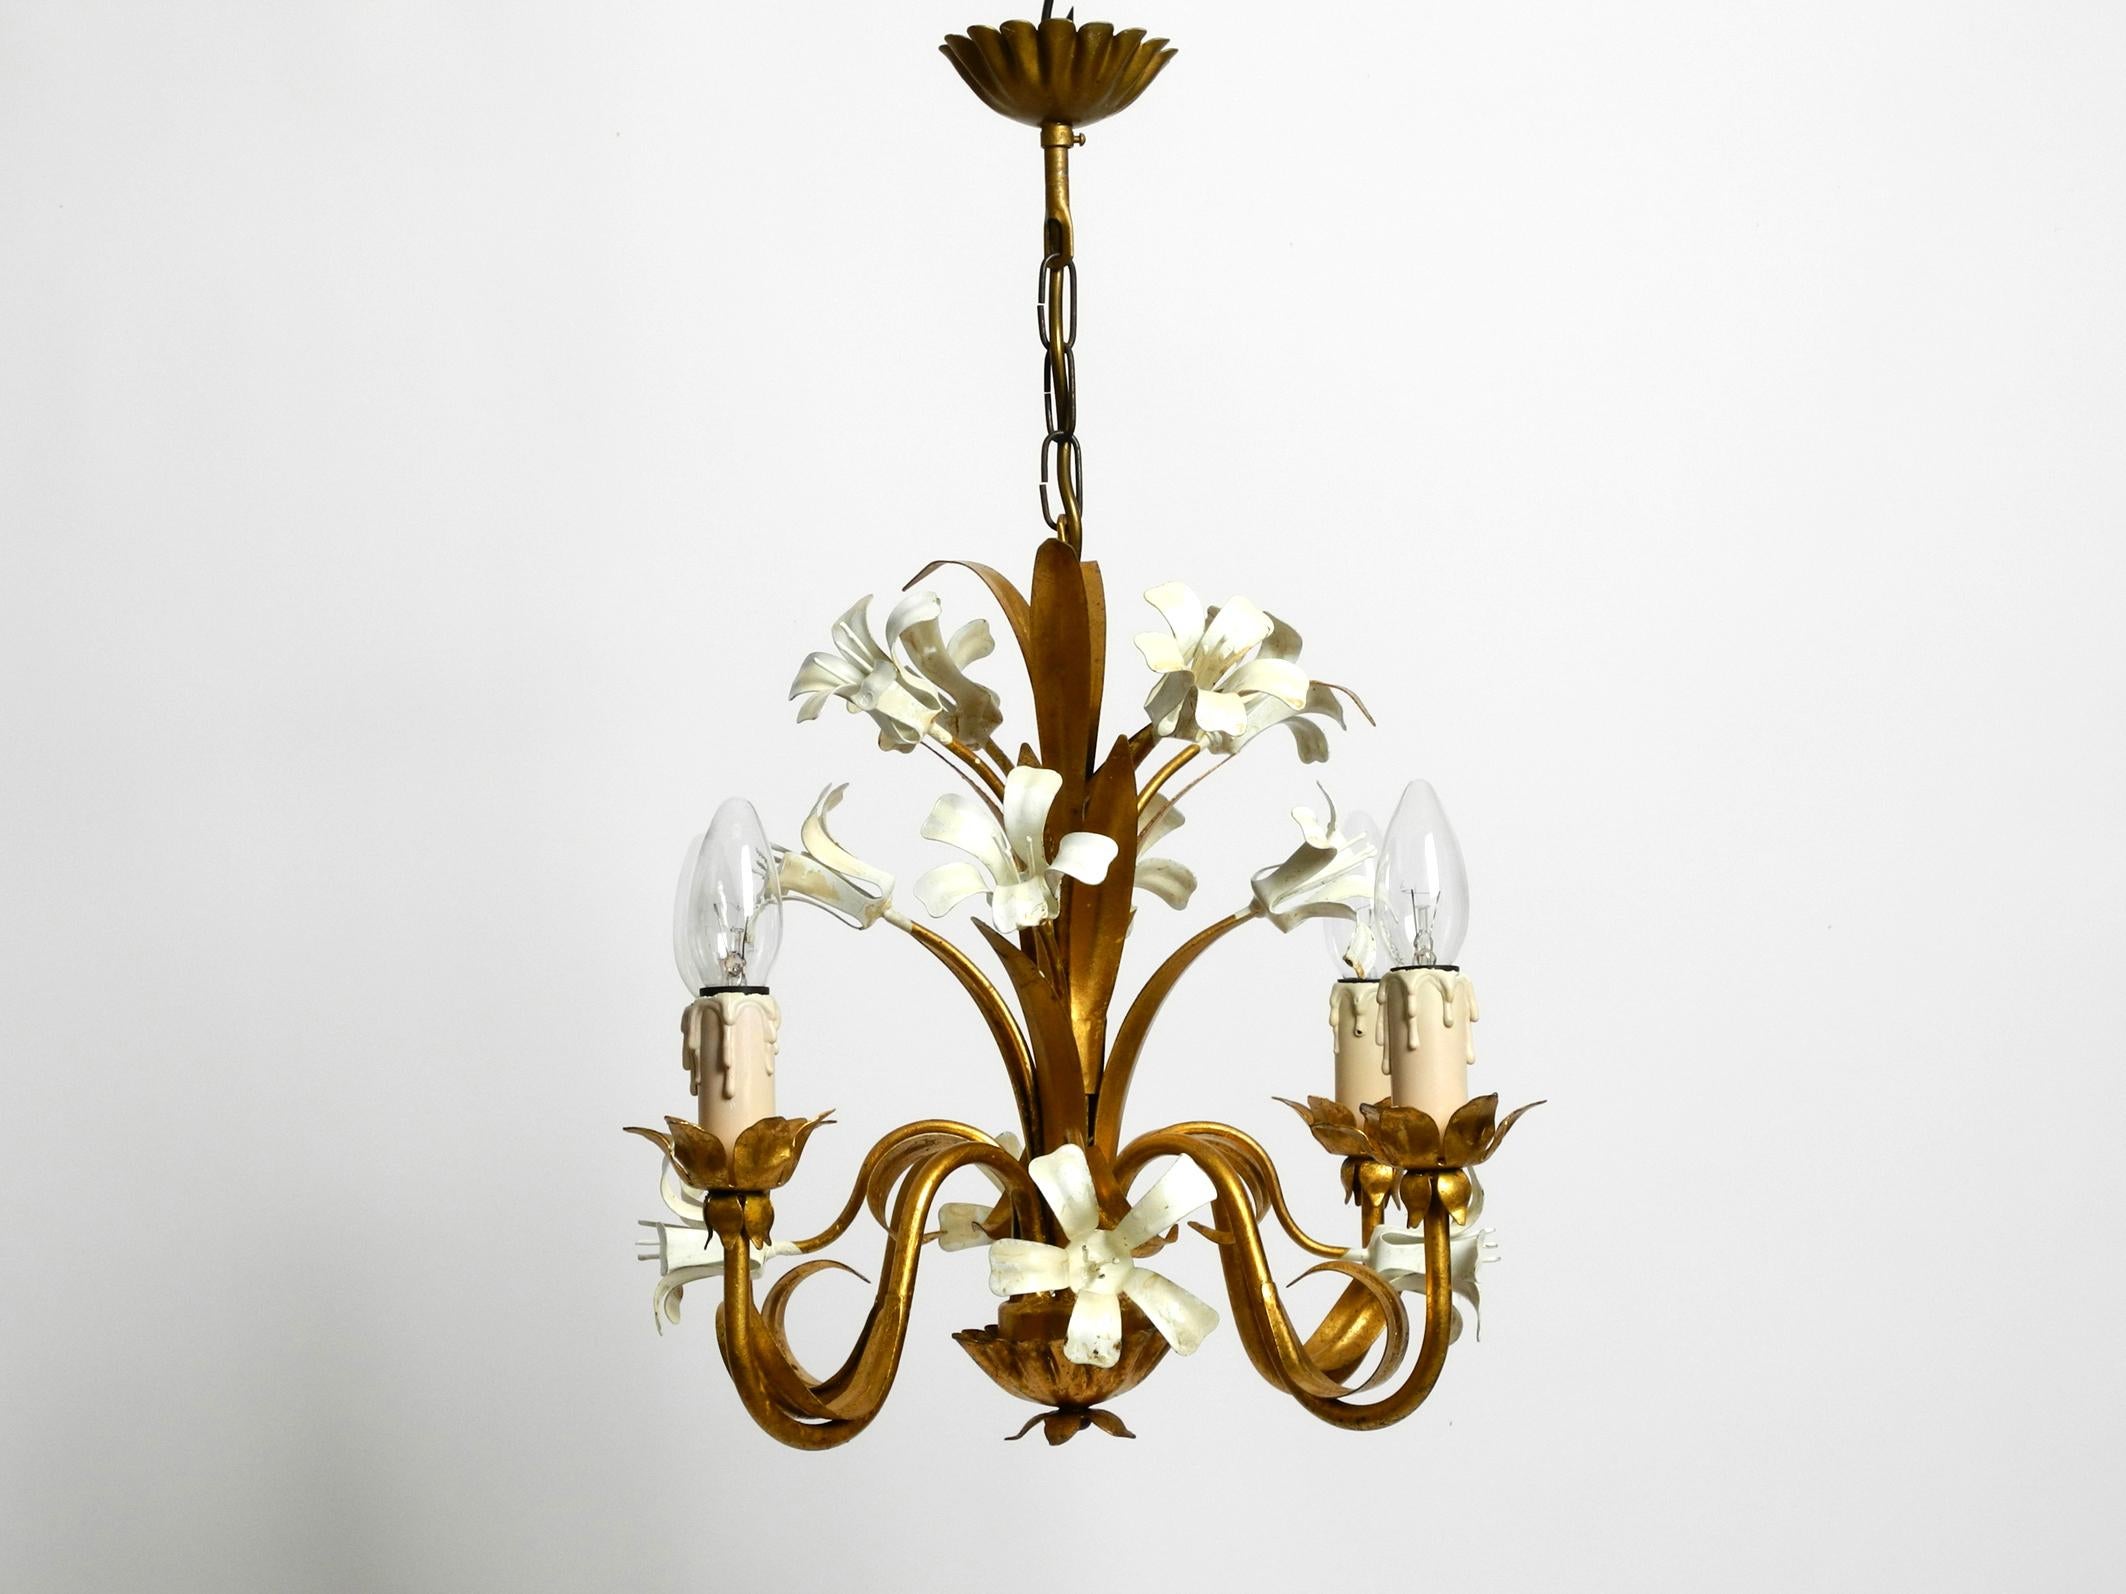 Small beautiful 1960s gold-plated 4-arm metal chandelier.
Very nice, elaborate design with lots of details.
Entire lamp is made of heavy gold plated metal.
The flowers are painted in creamy white. One E14 socket each. Fully functional and 100%